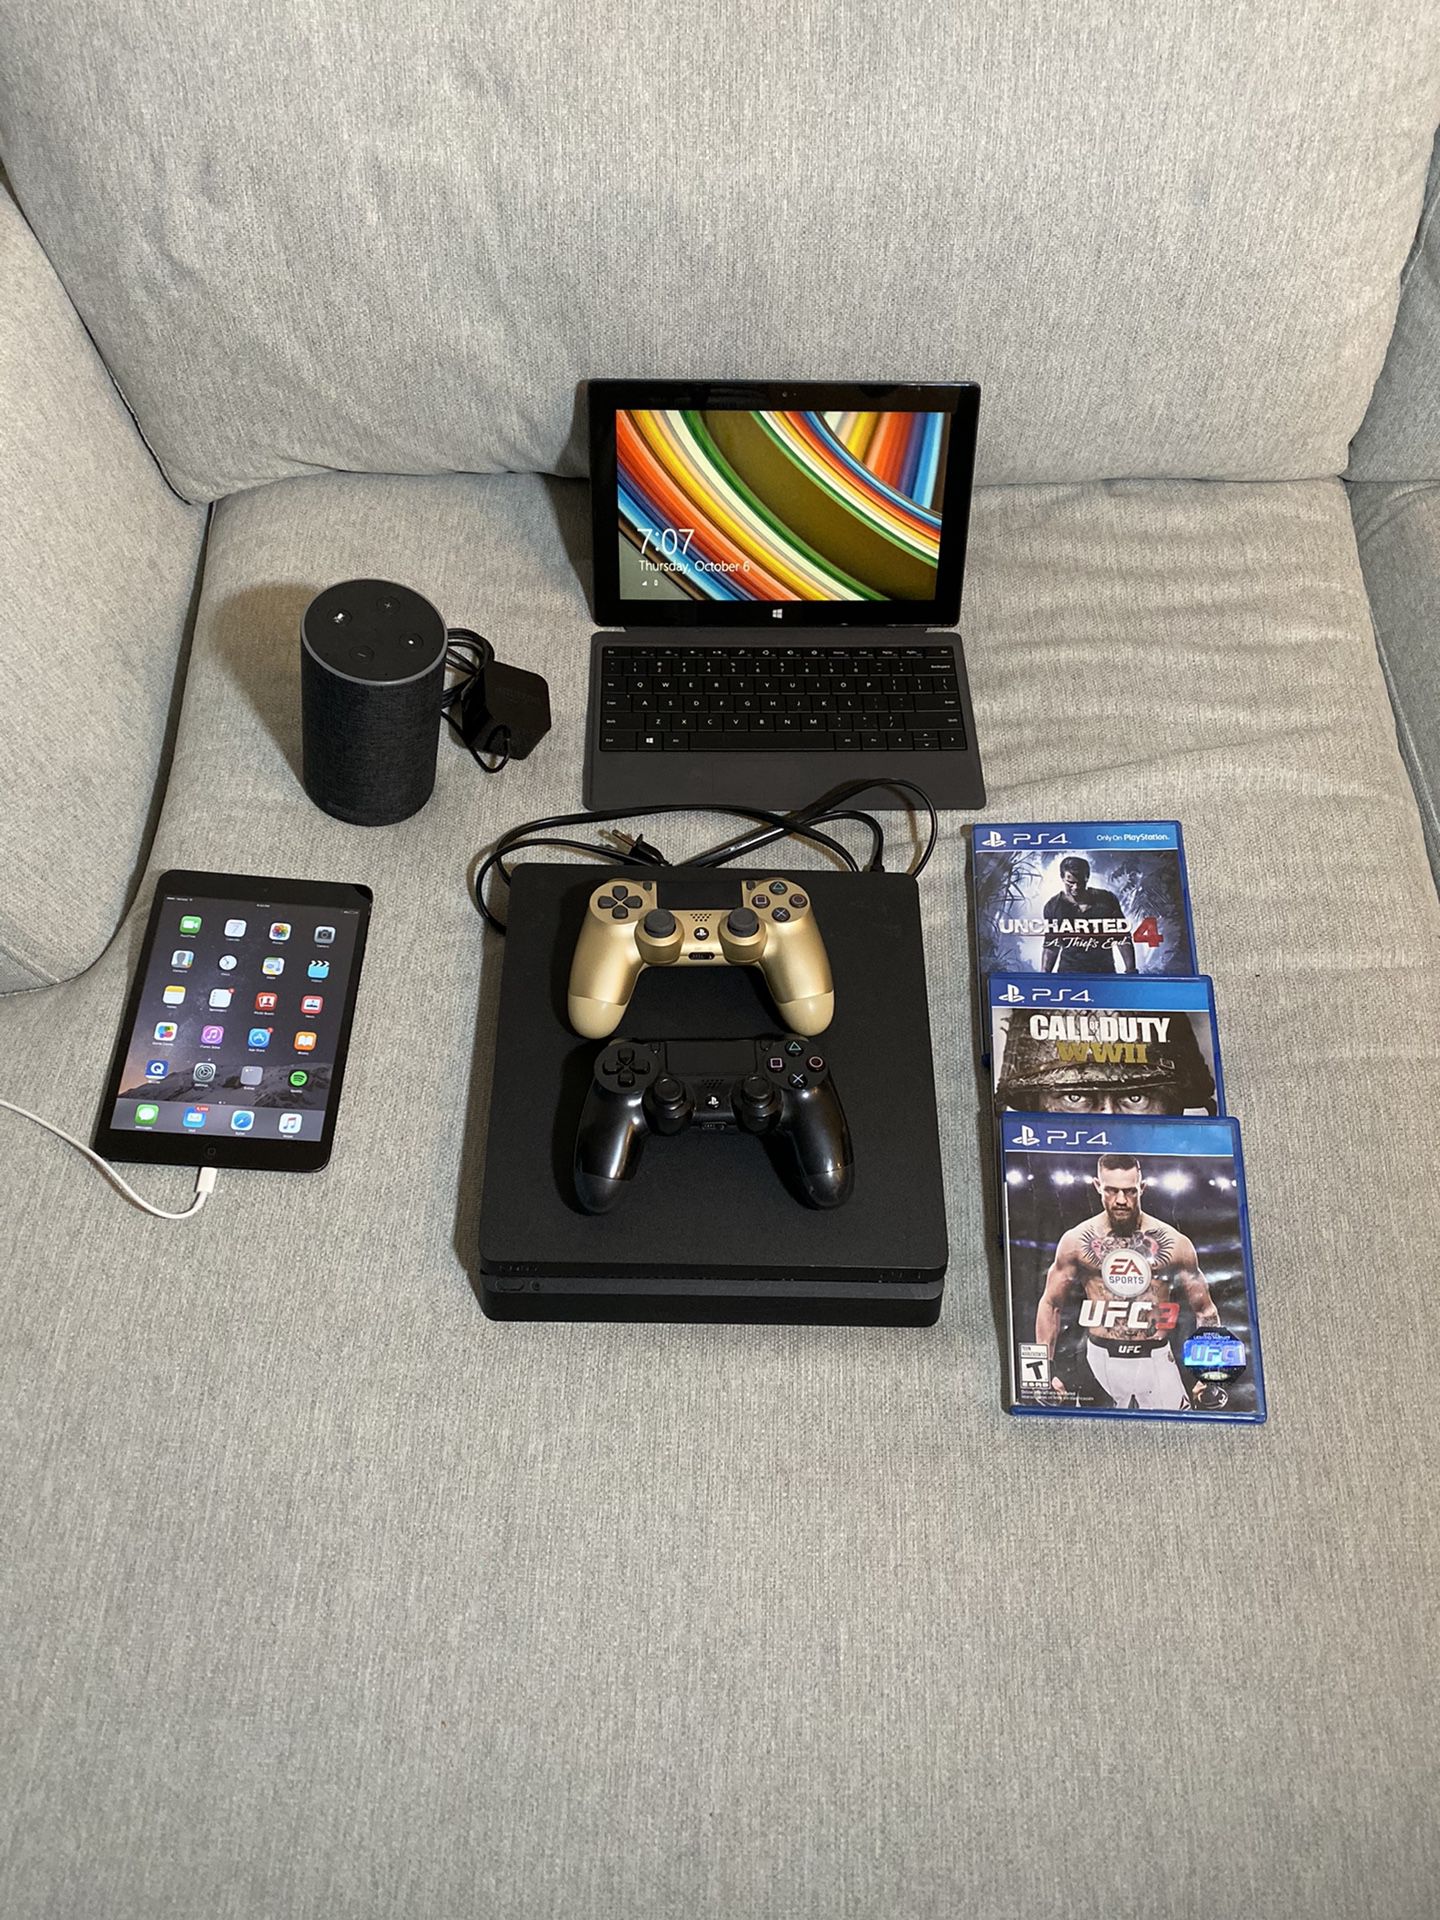 IPad, Surface Pro, Amazon echo and PS4 with 3 games and controllers